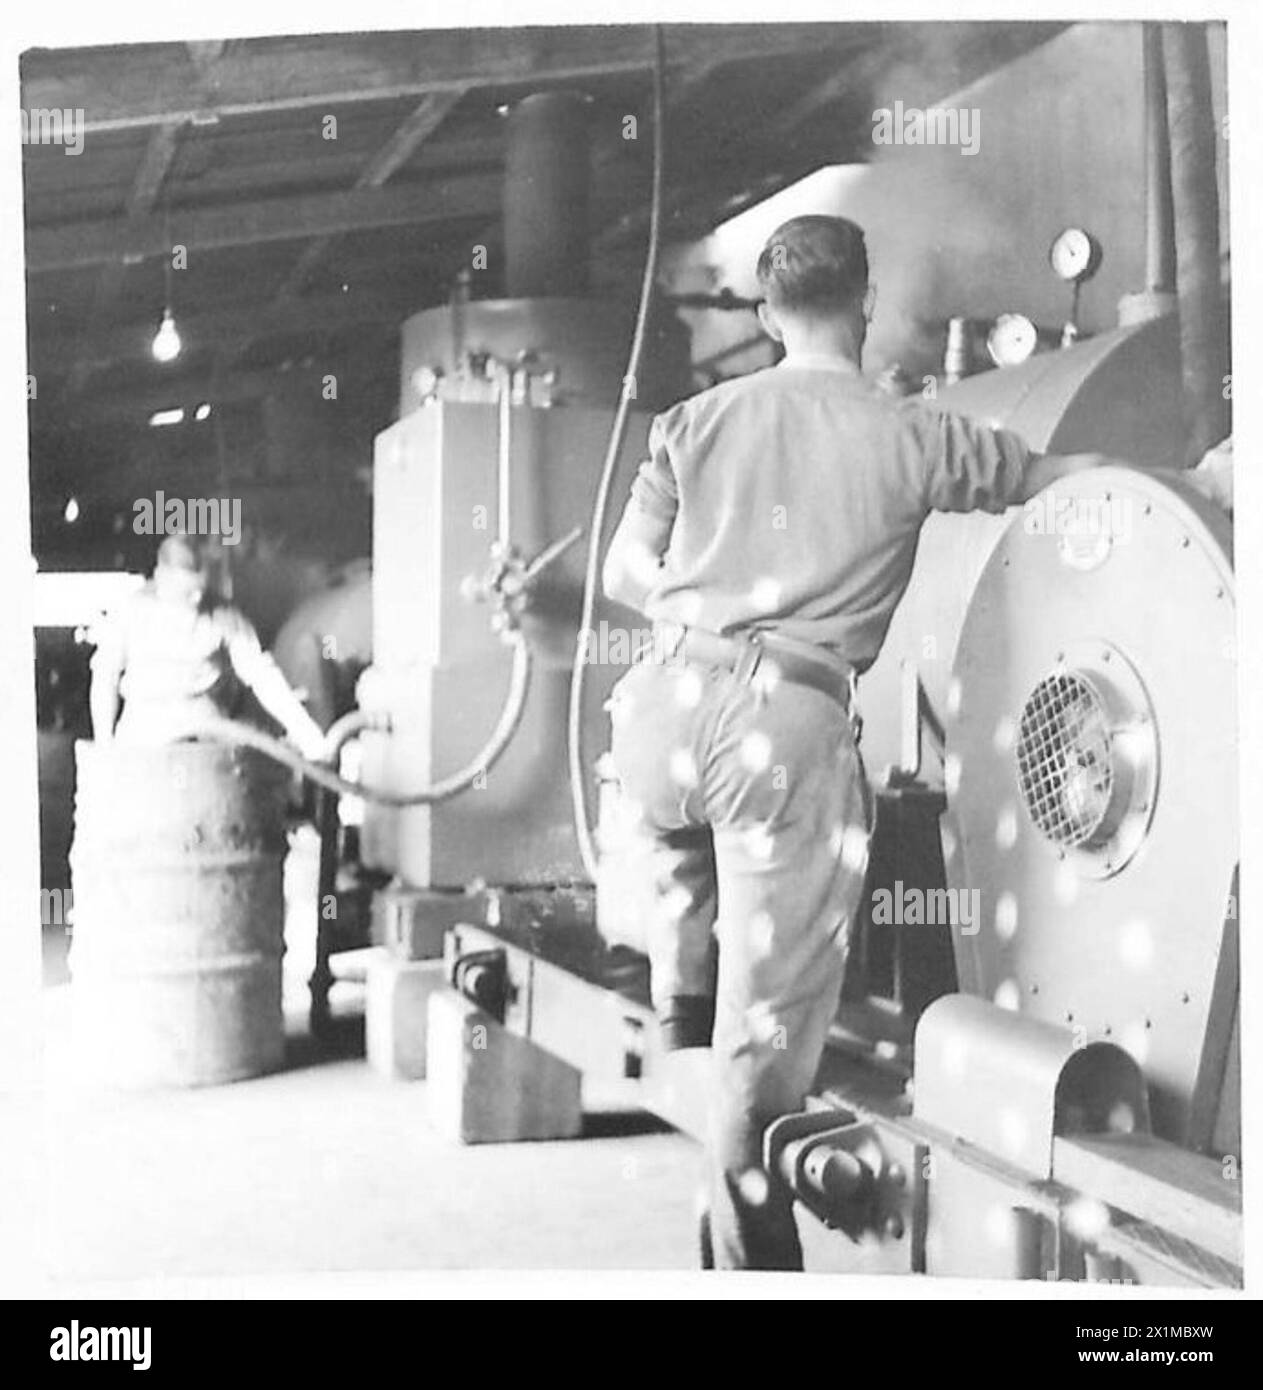 NORTH AFRICAARMY LAUDNRY SERVICENO.1 BASE HOSPITAL LAUNDRY - Pte. G. Cooper of 23 Felixstowe Road, Edmonton, London, a boilerhouse operator, British Army Stock Photo